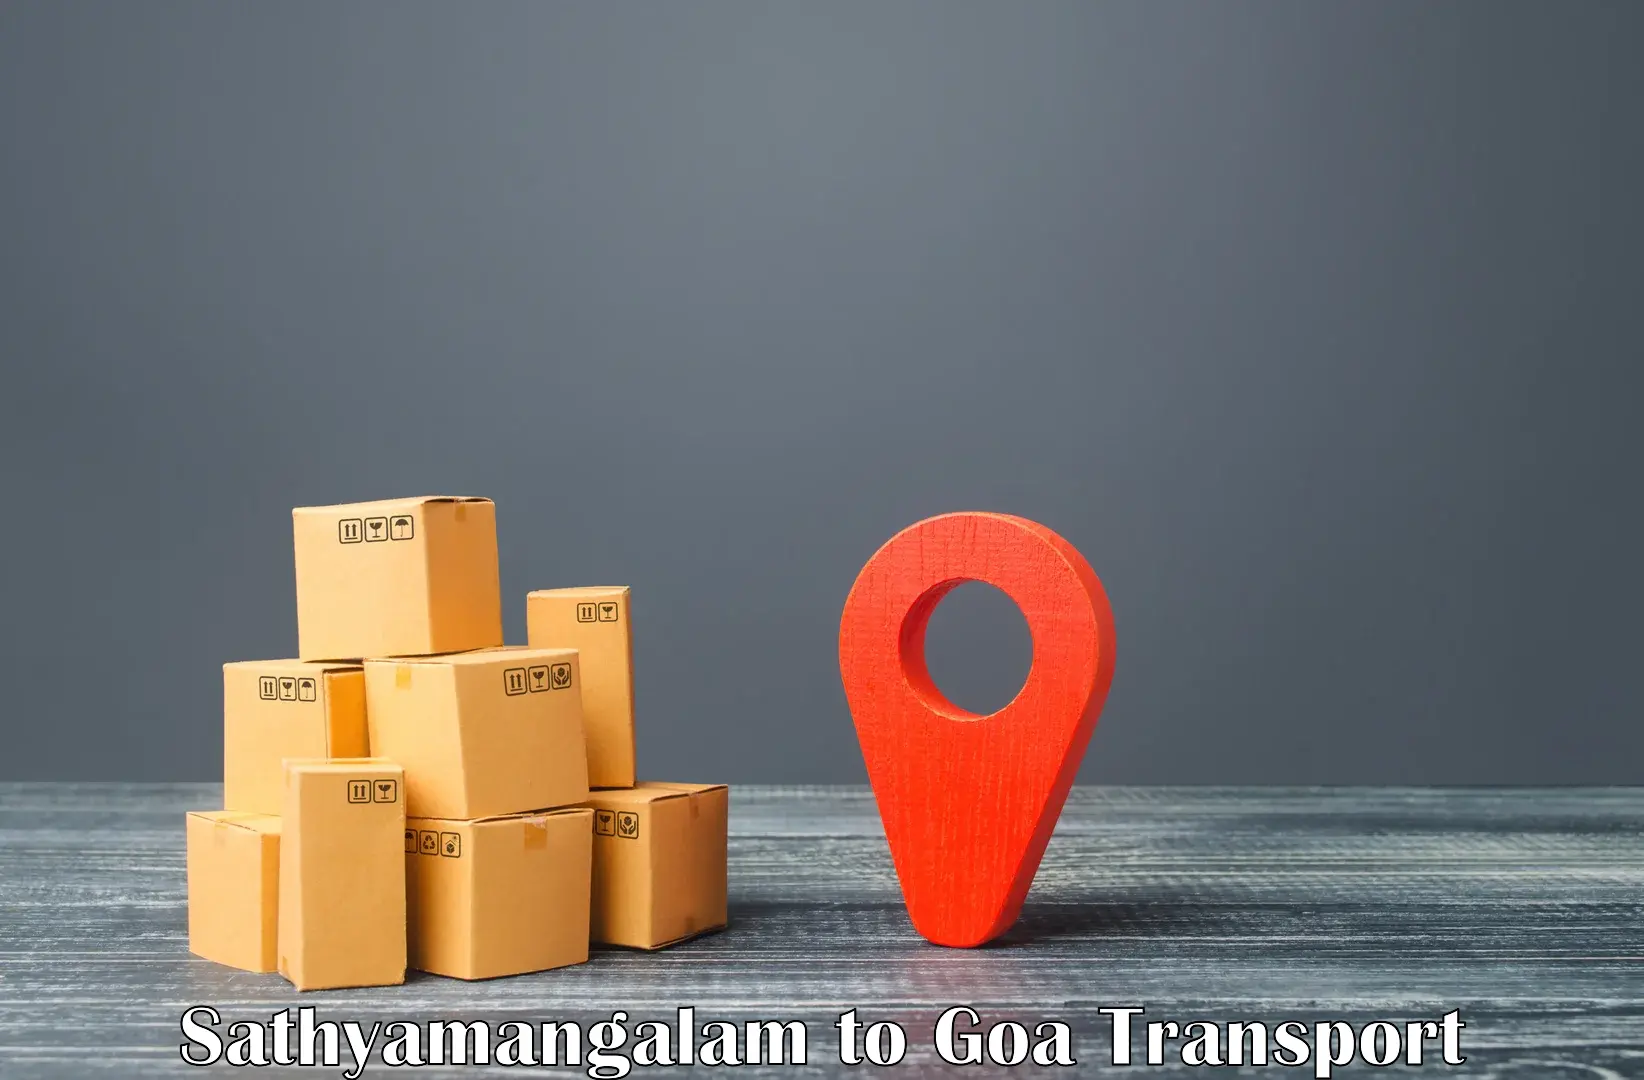 Nearby transport service in Sathyamangalam to Goa